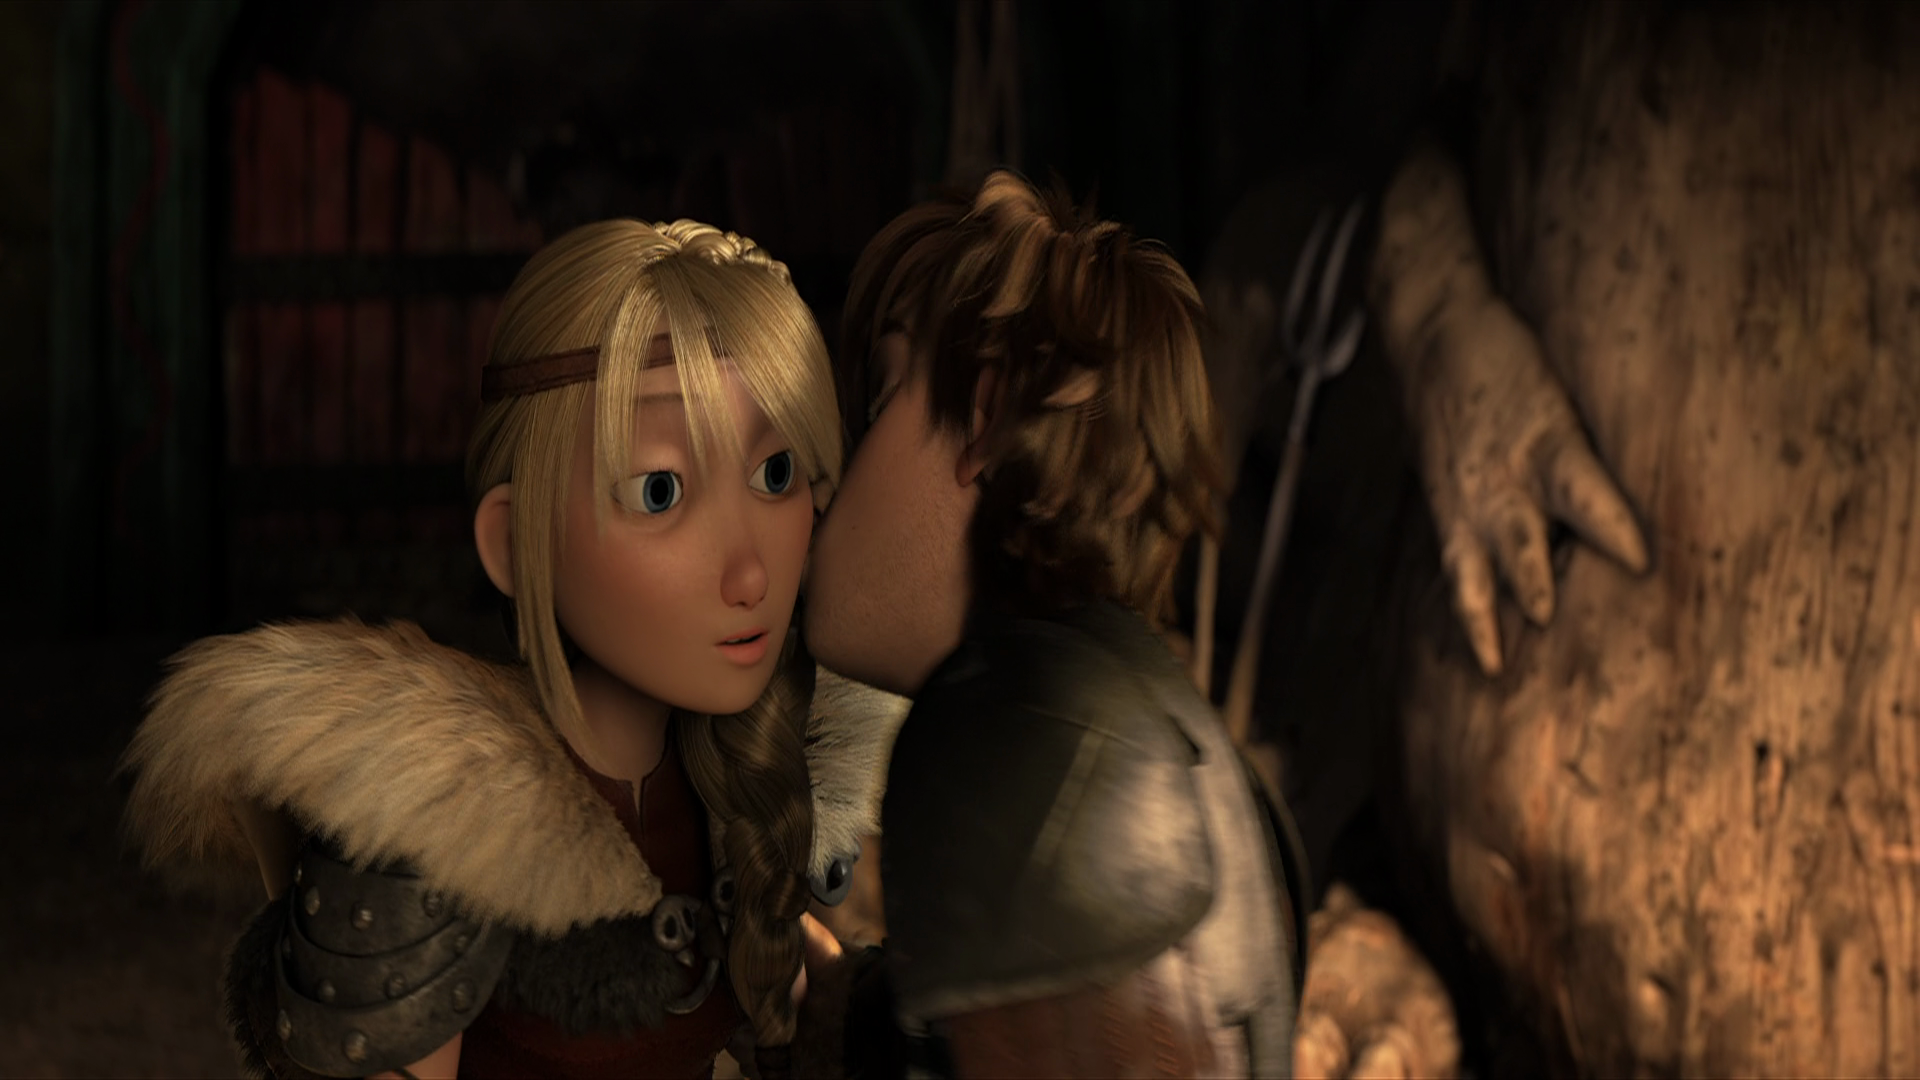 Astrid How To Train Your Dragon Hiccup How To Train Your Dragon How To Train Your Dragon 2 1920x1080